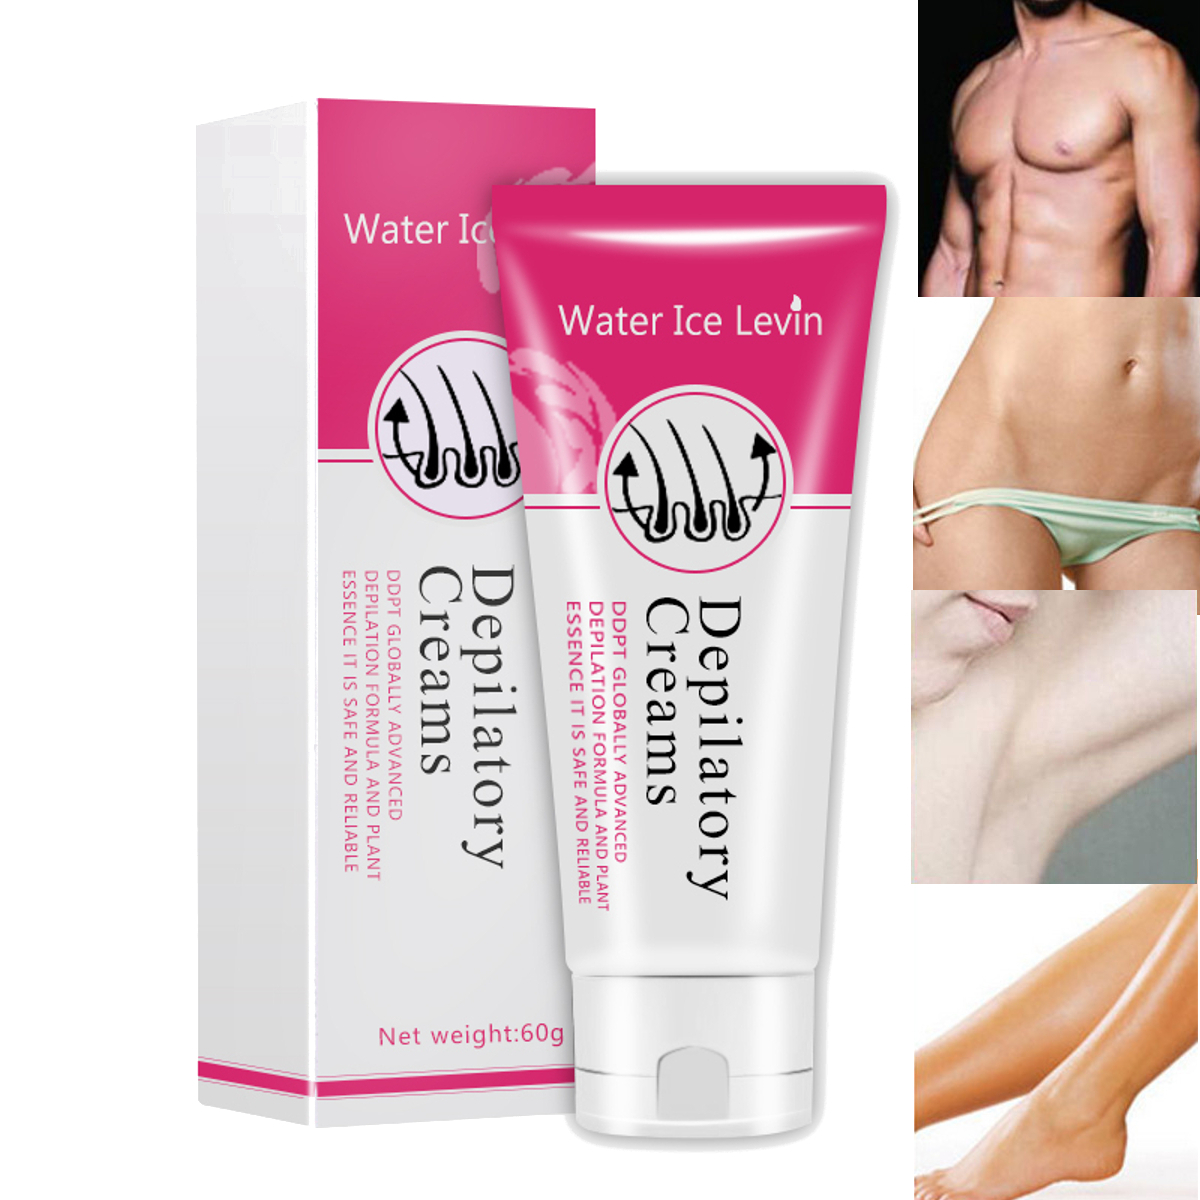 Unisex 2-in-1 Hair Removal Cream